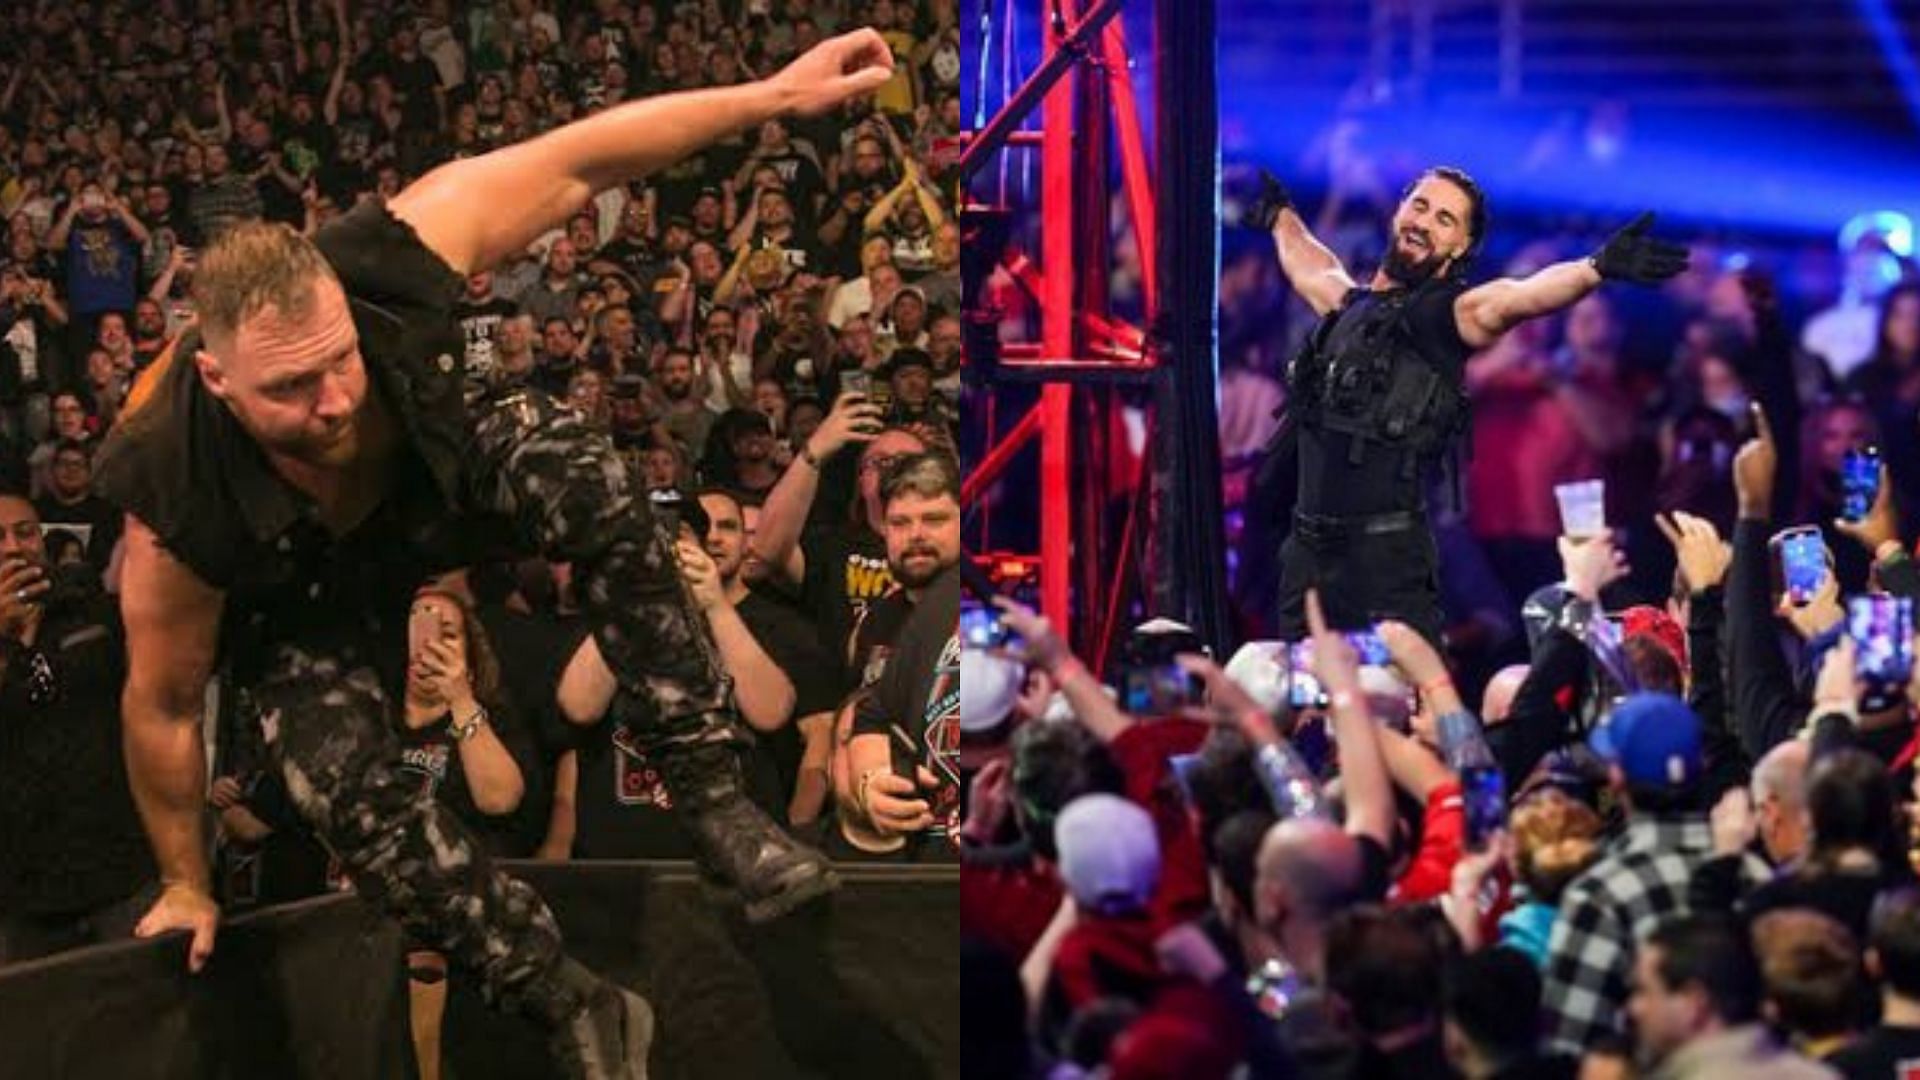 Jon Moxley and Seth Rollins making their respective entrances